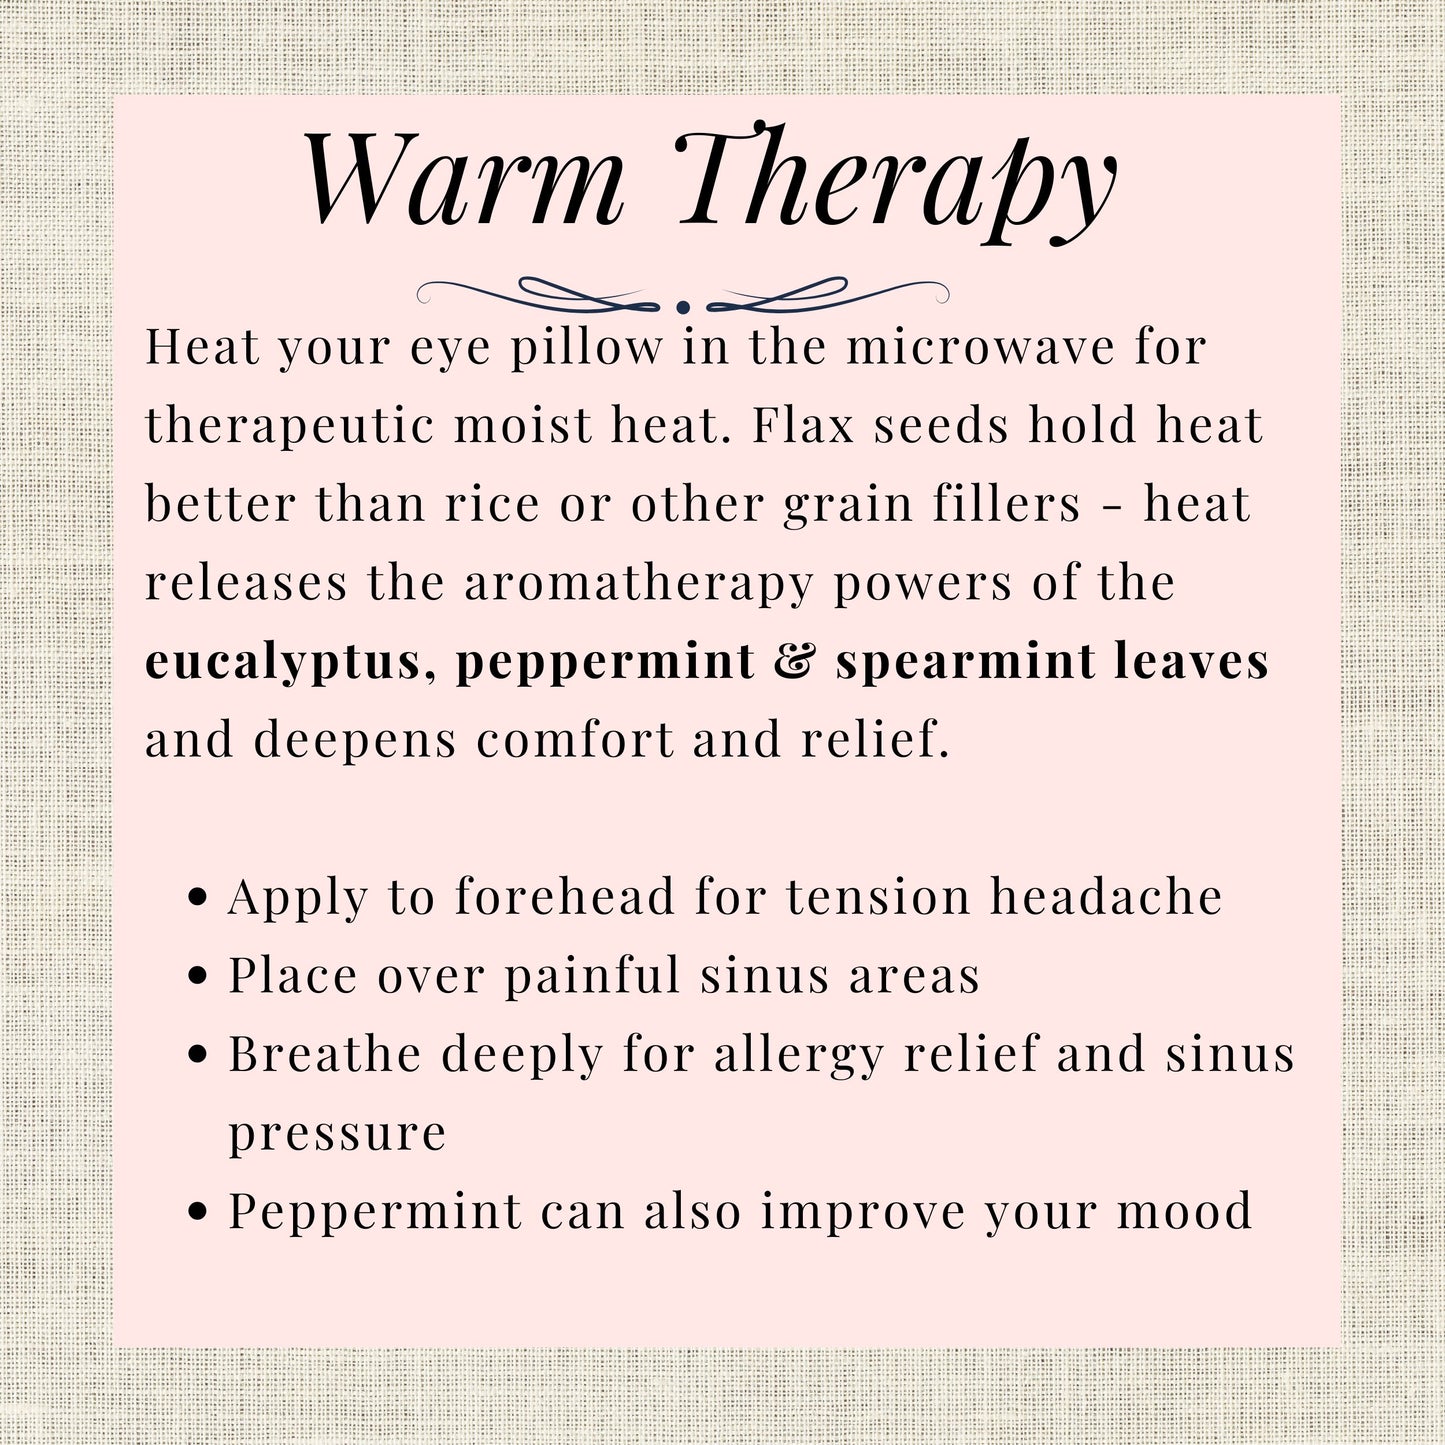 infographic for Warm Therapy eye pillow